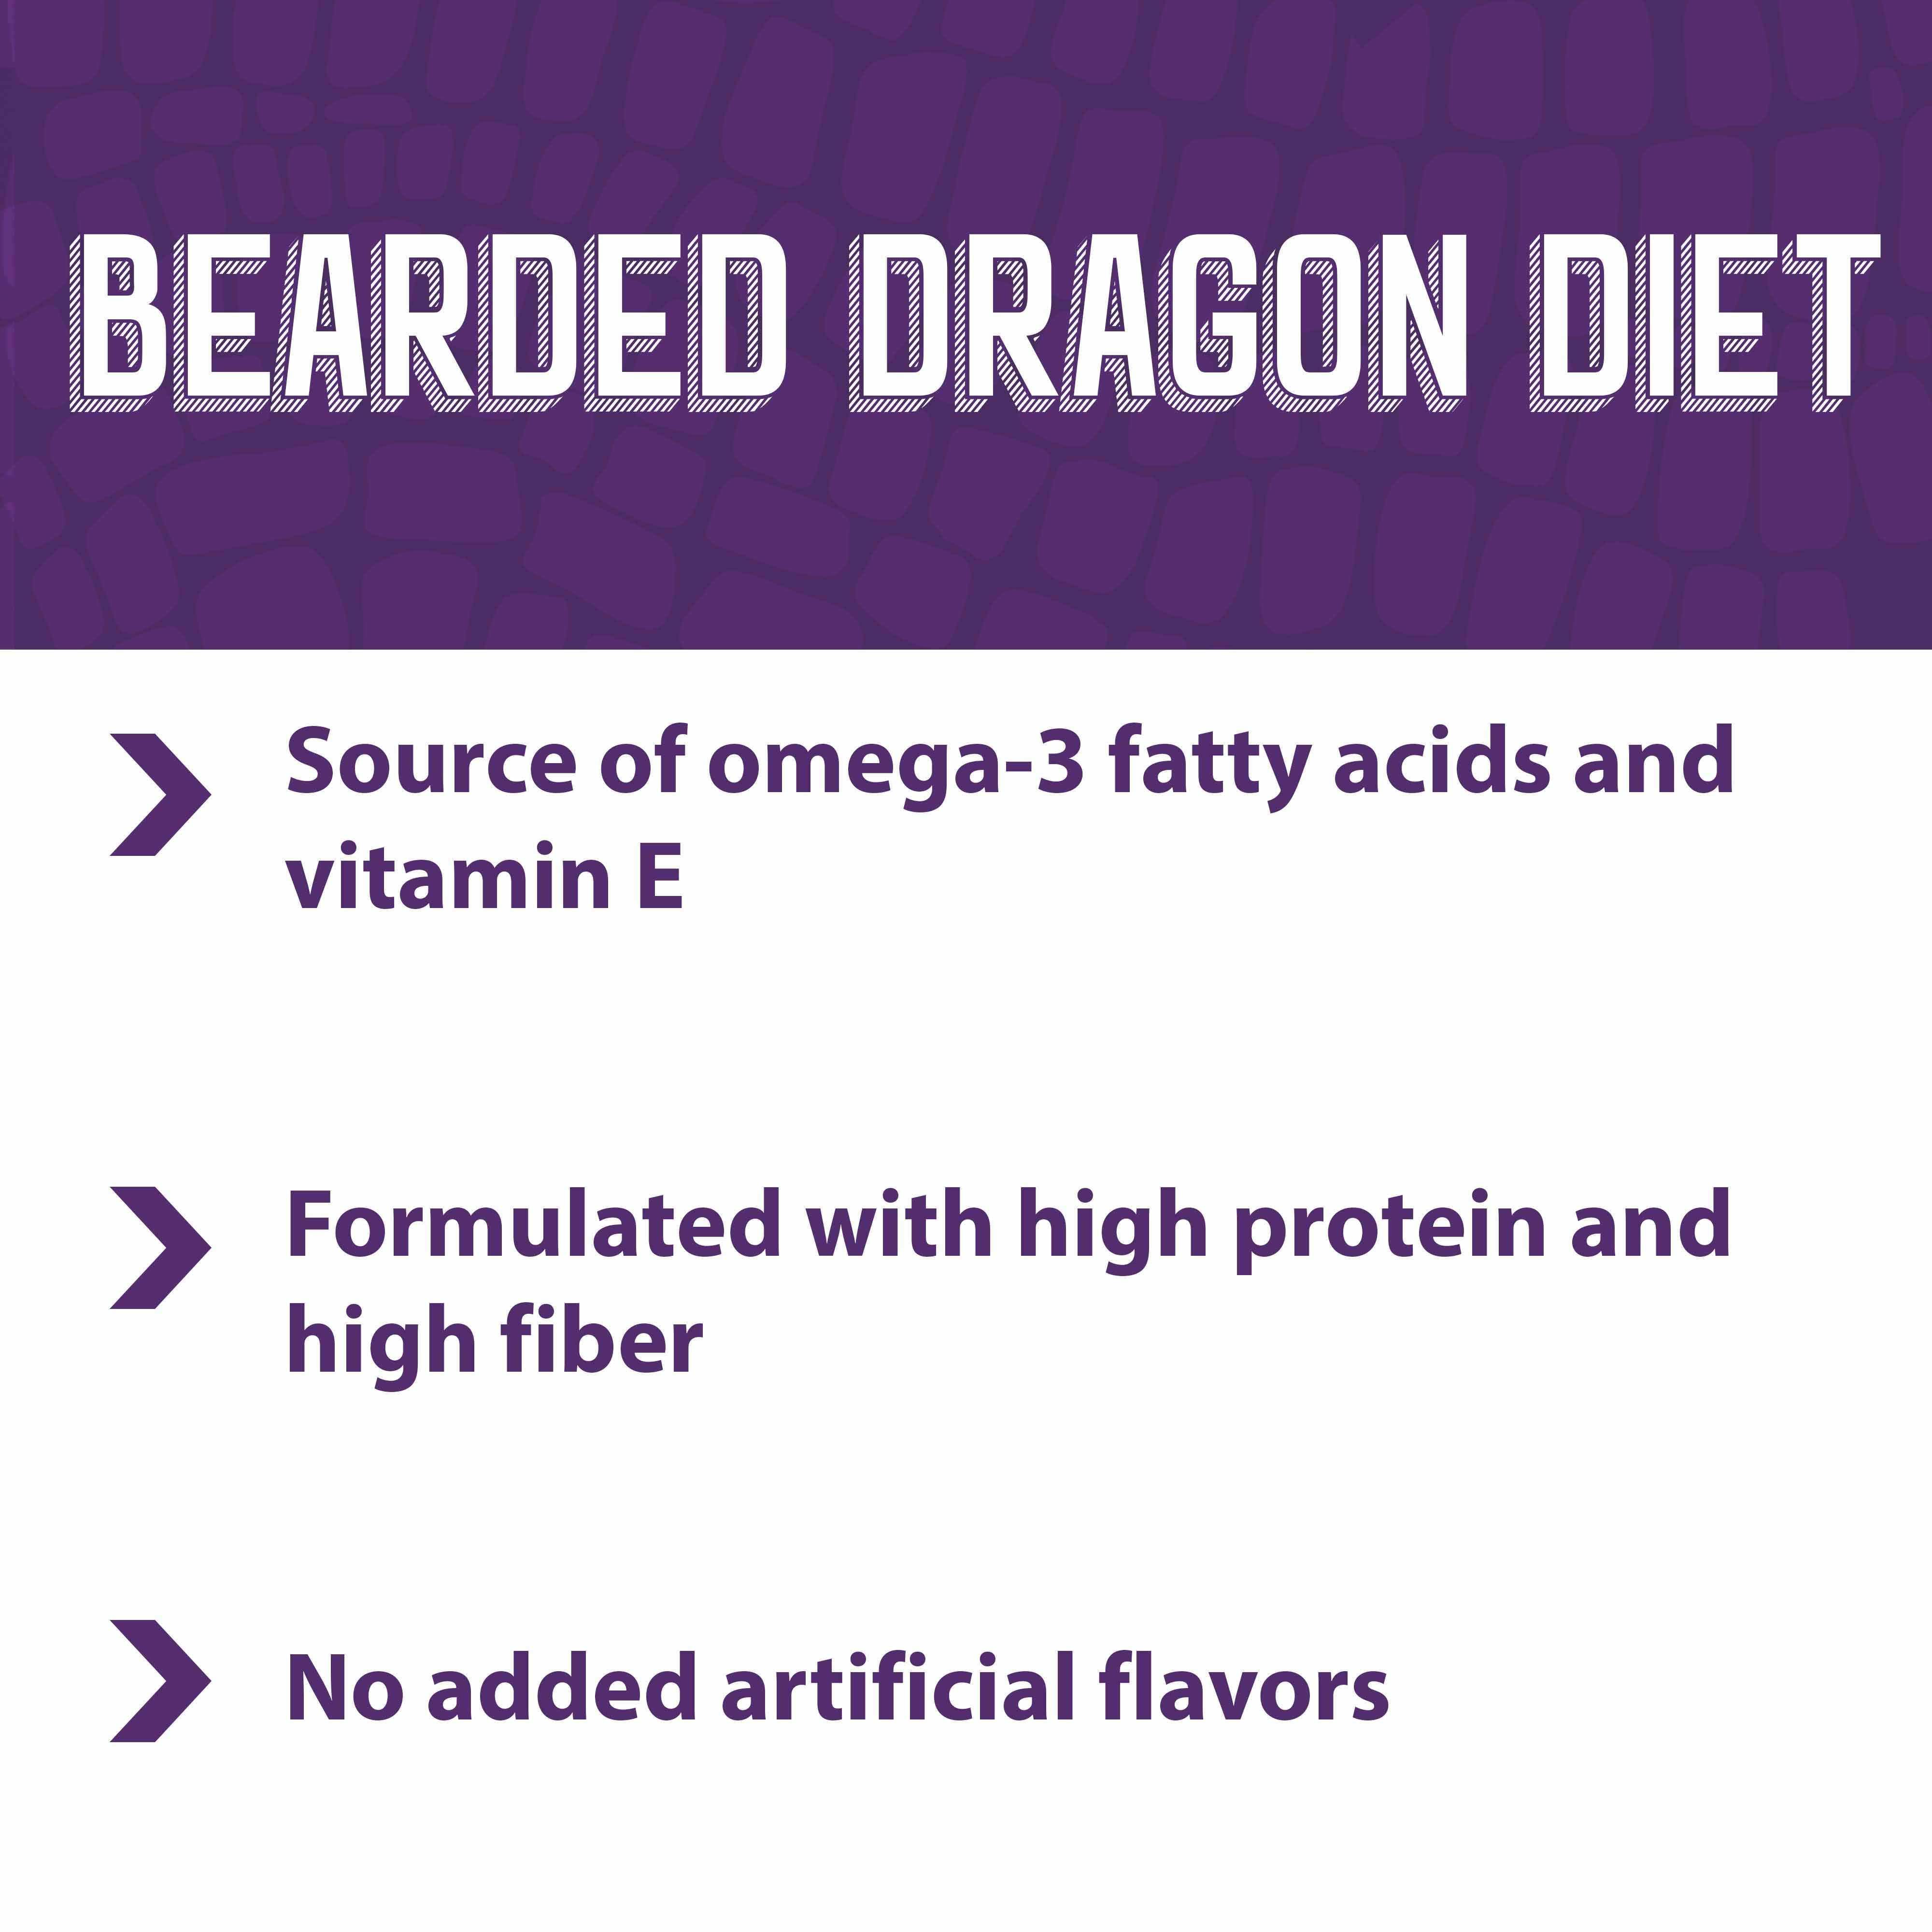 Bearded Dragon Diet is a source of omega 3 fatty acids and vitamin E